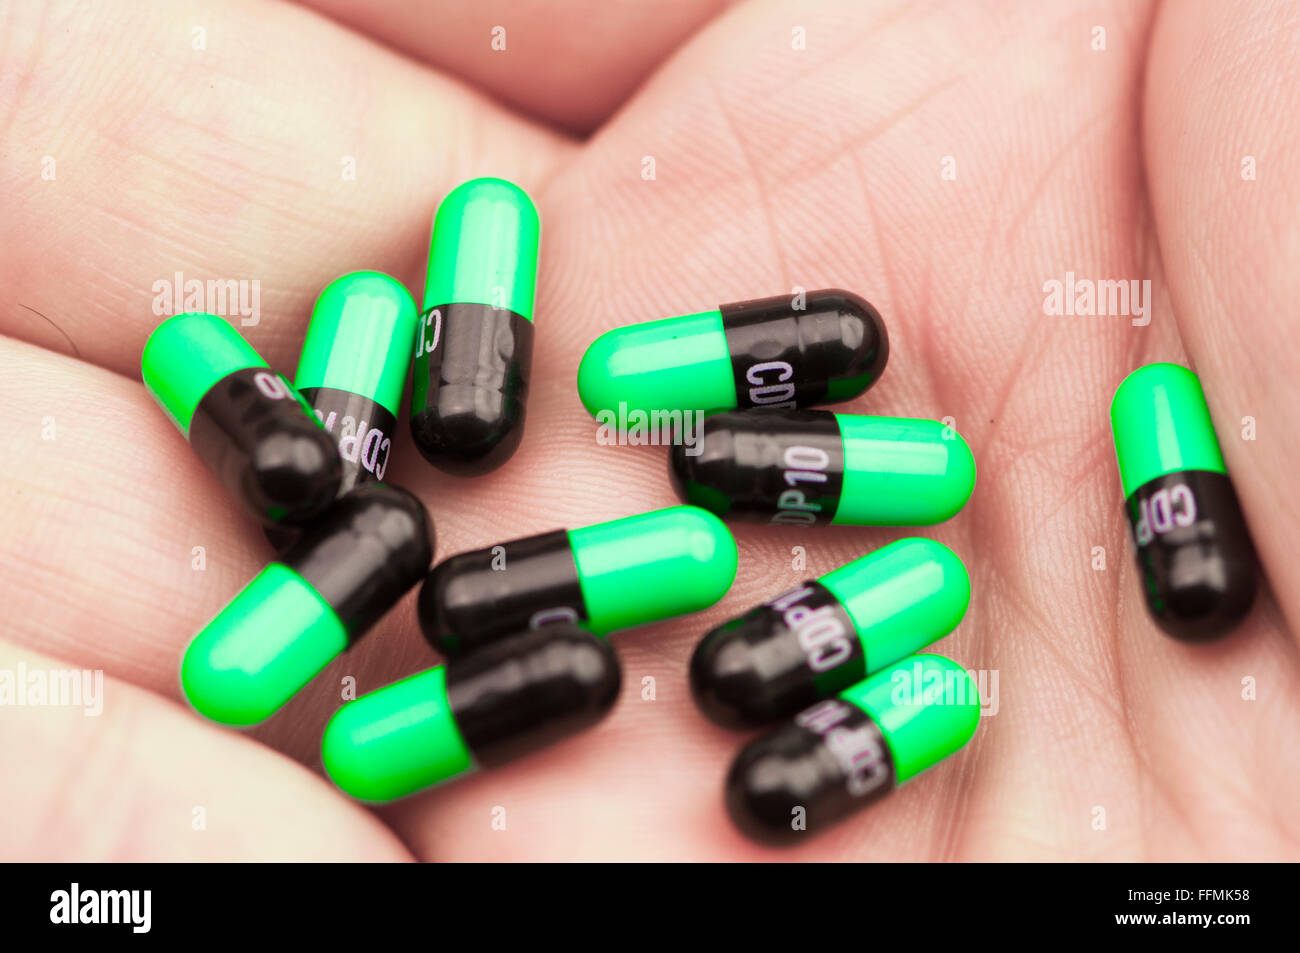 10 Valium tablets (chlordiazepoxide) in the palm of a hand.  This is a high dose (100mg) which would incapacitate most people. Stock Photo